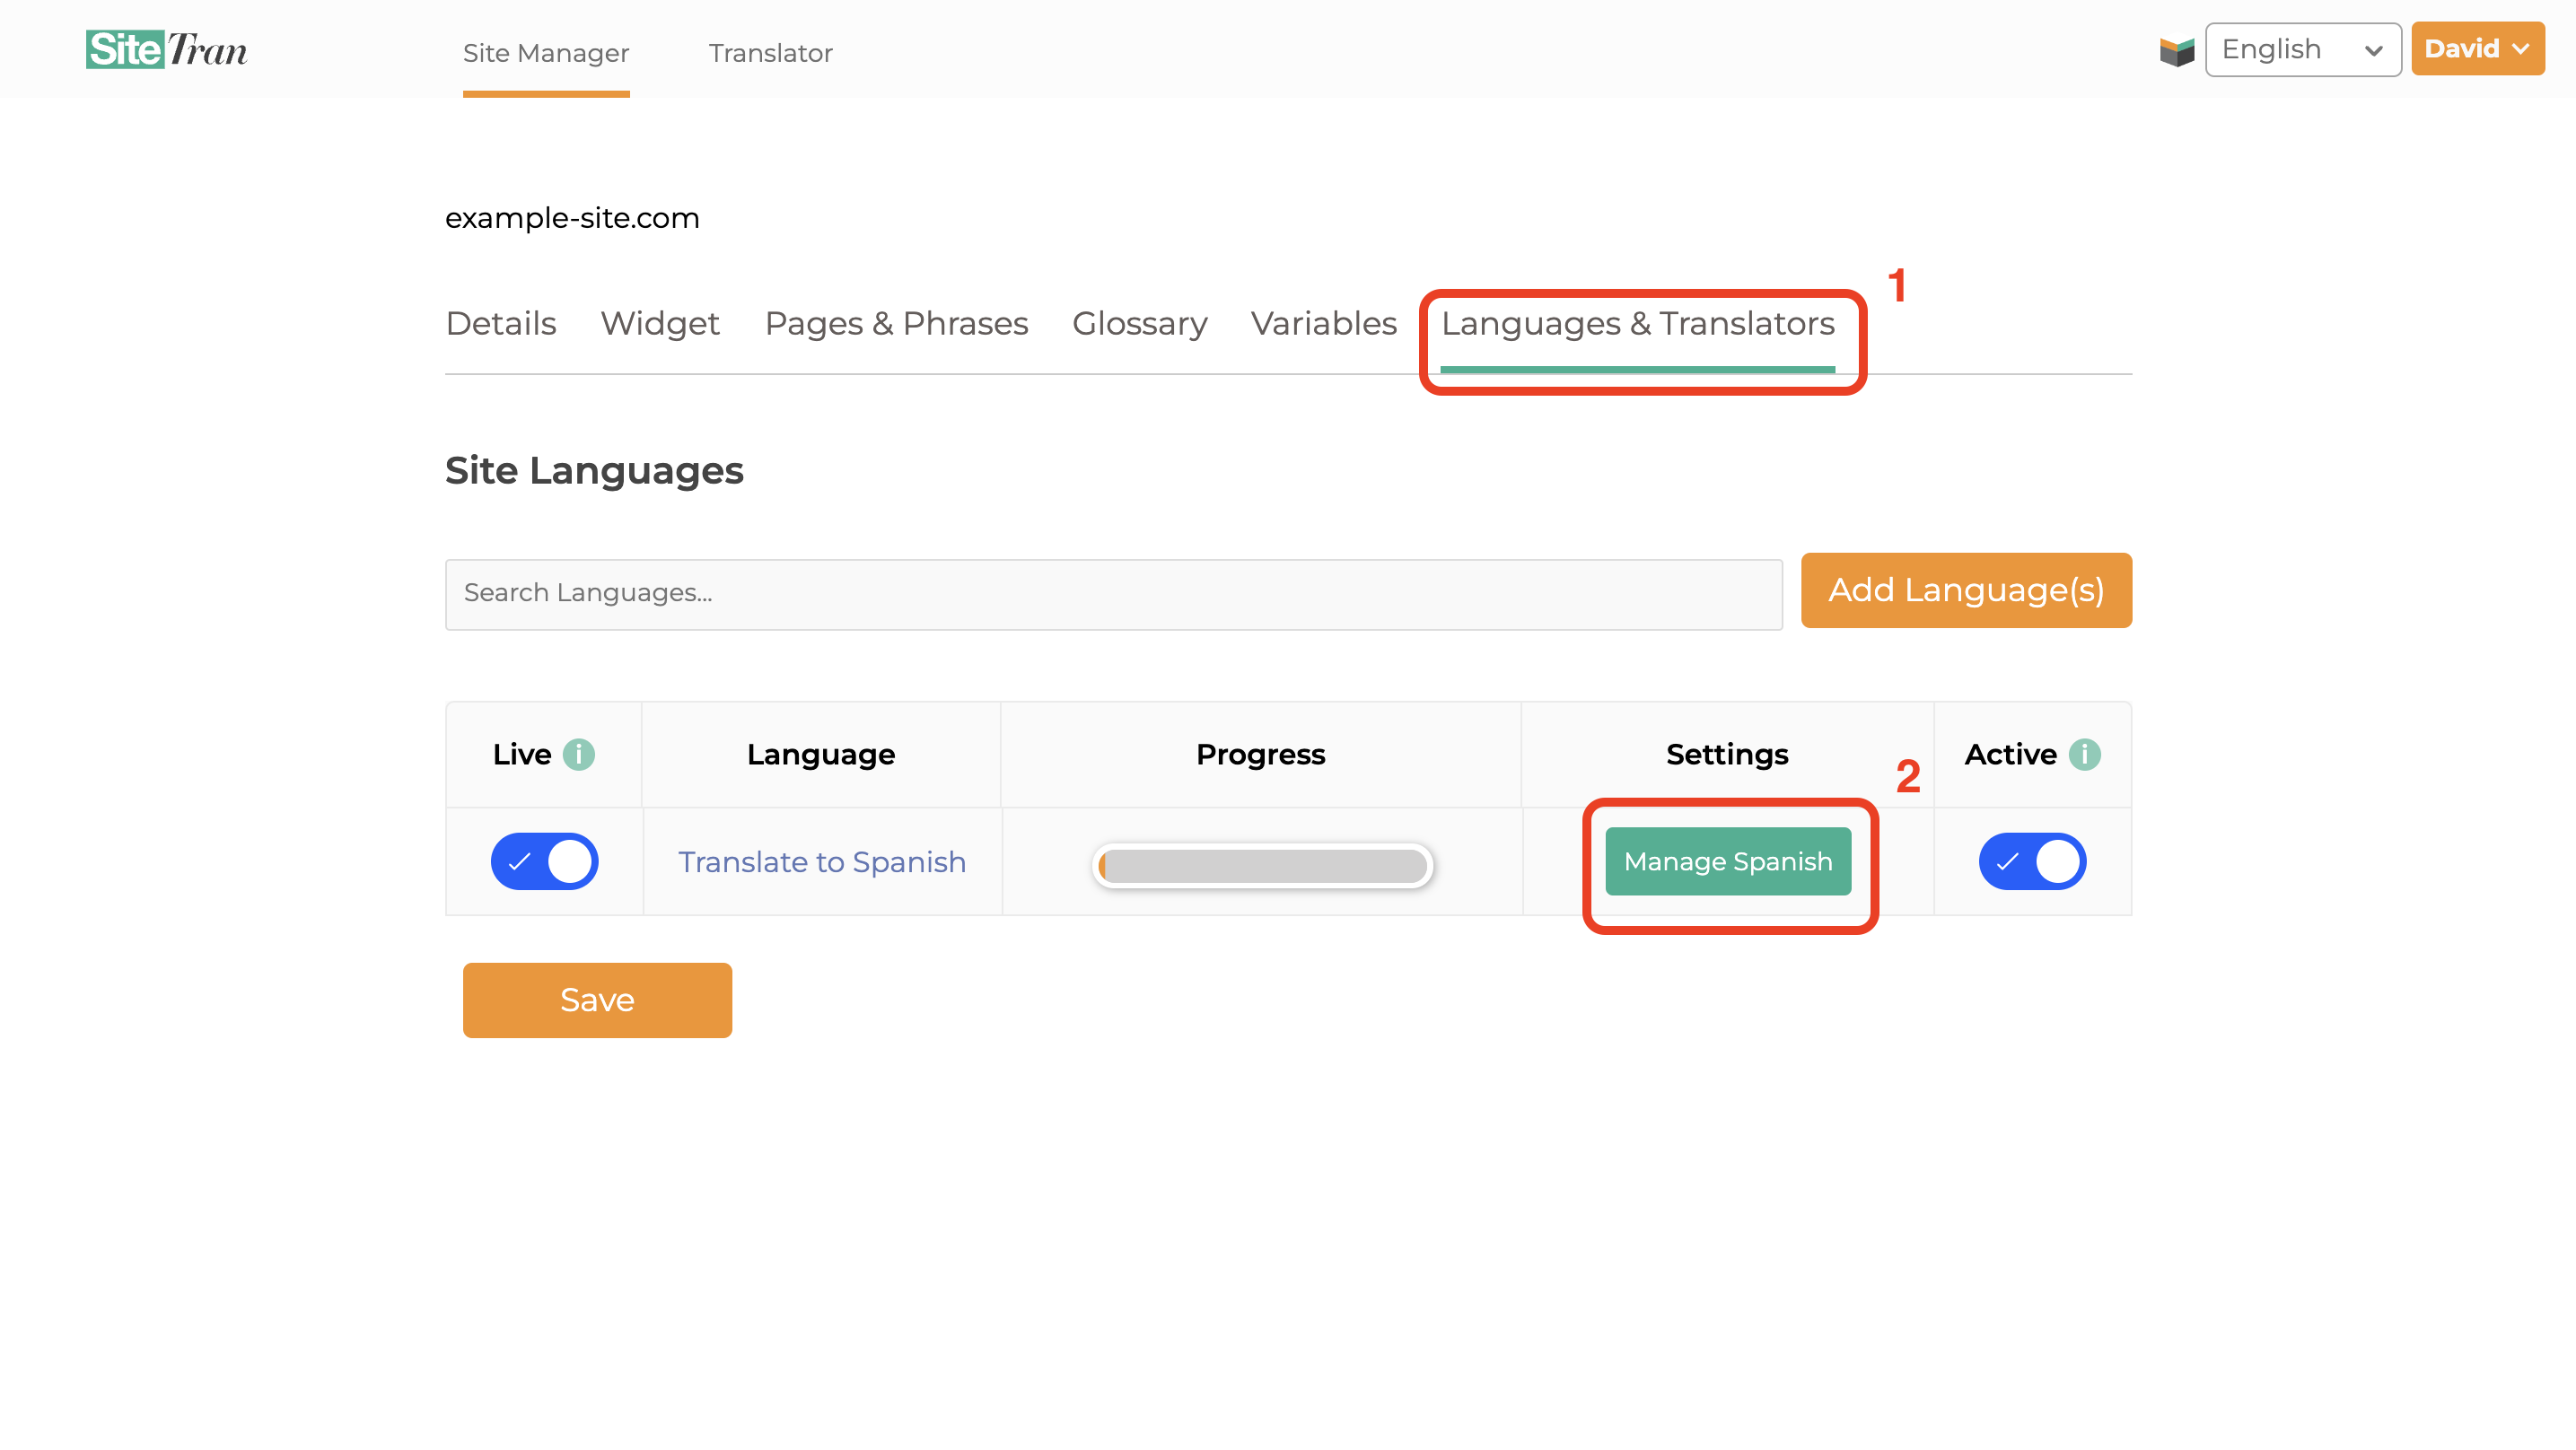 Go to your “Languages & Translators” page and select “Manage LANGUAGE”